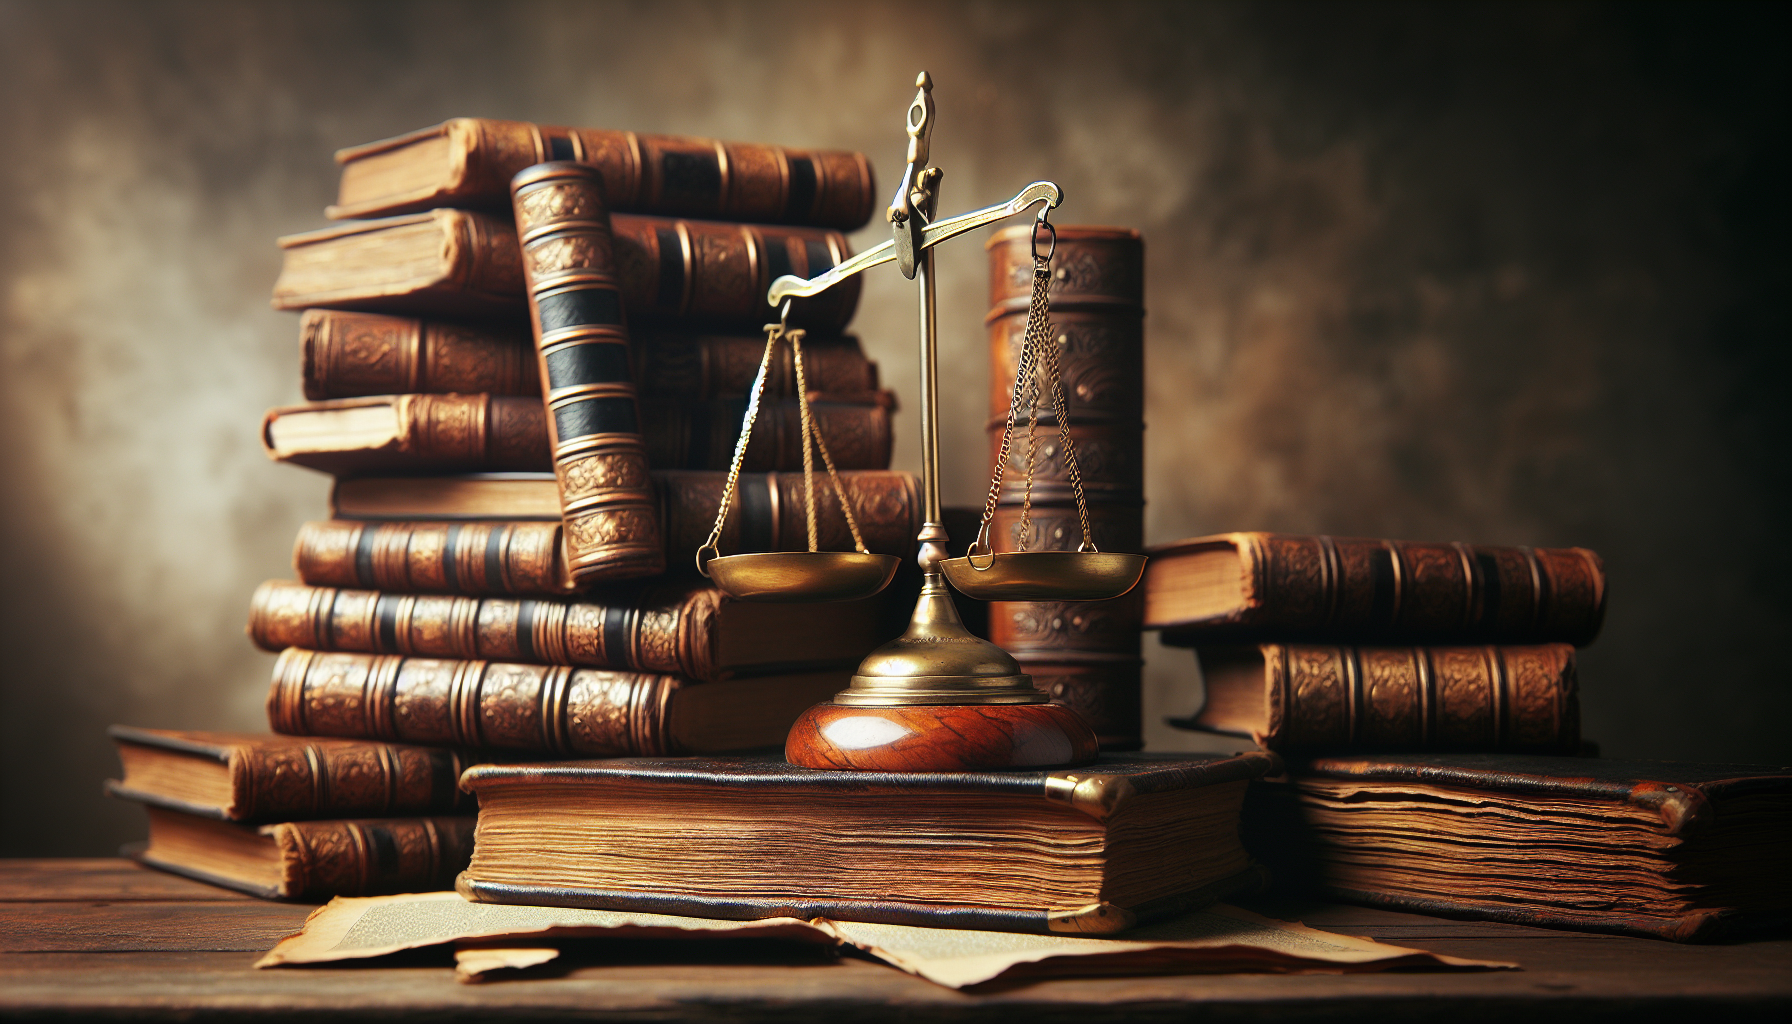 An image of legal books and scales of justice